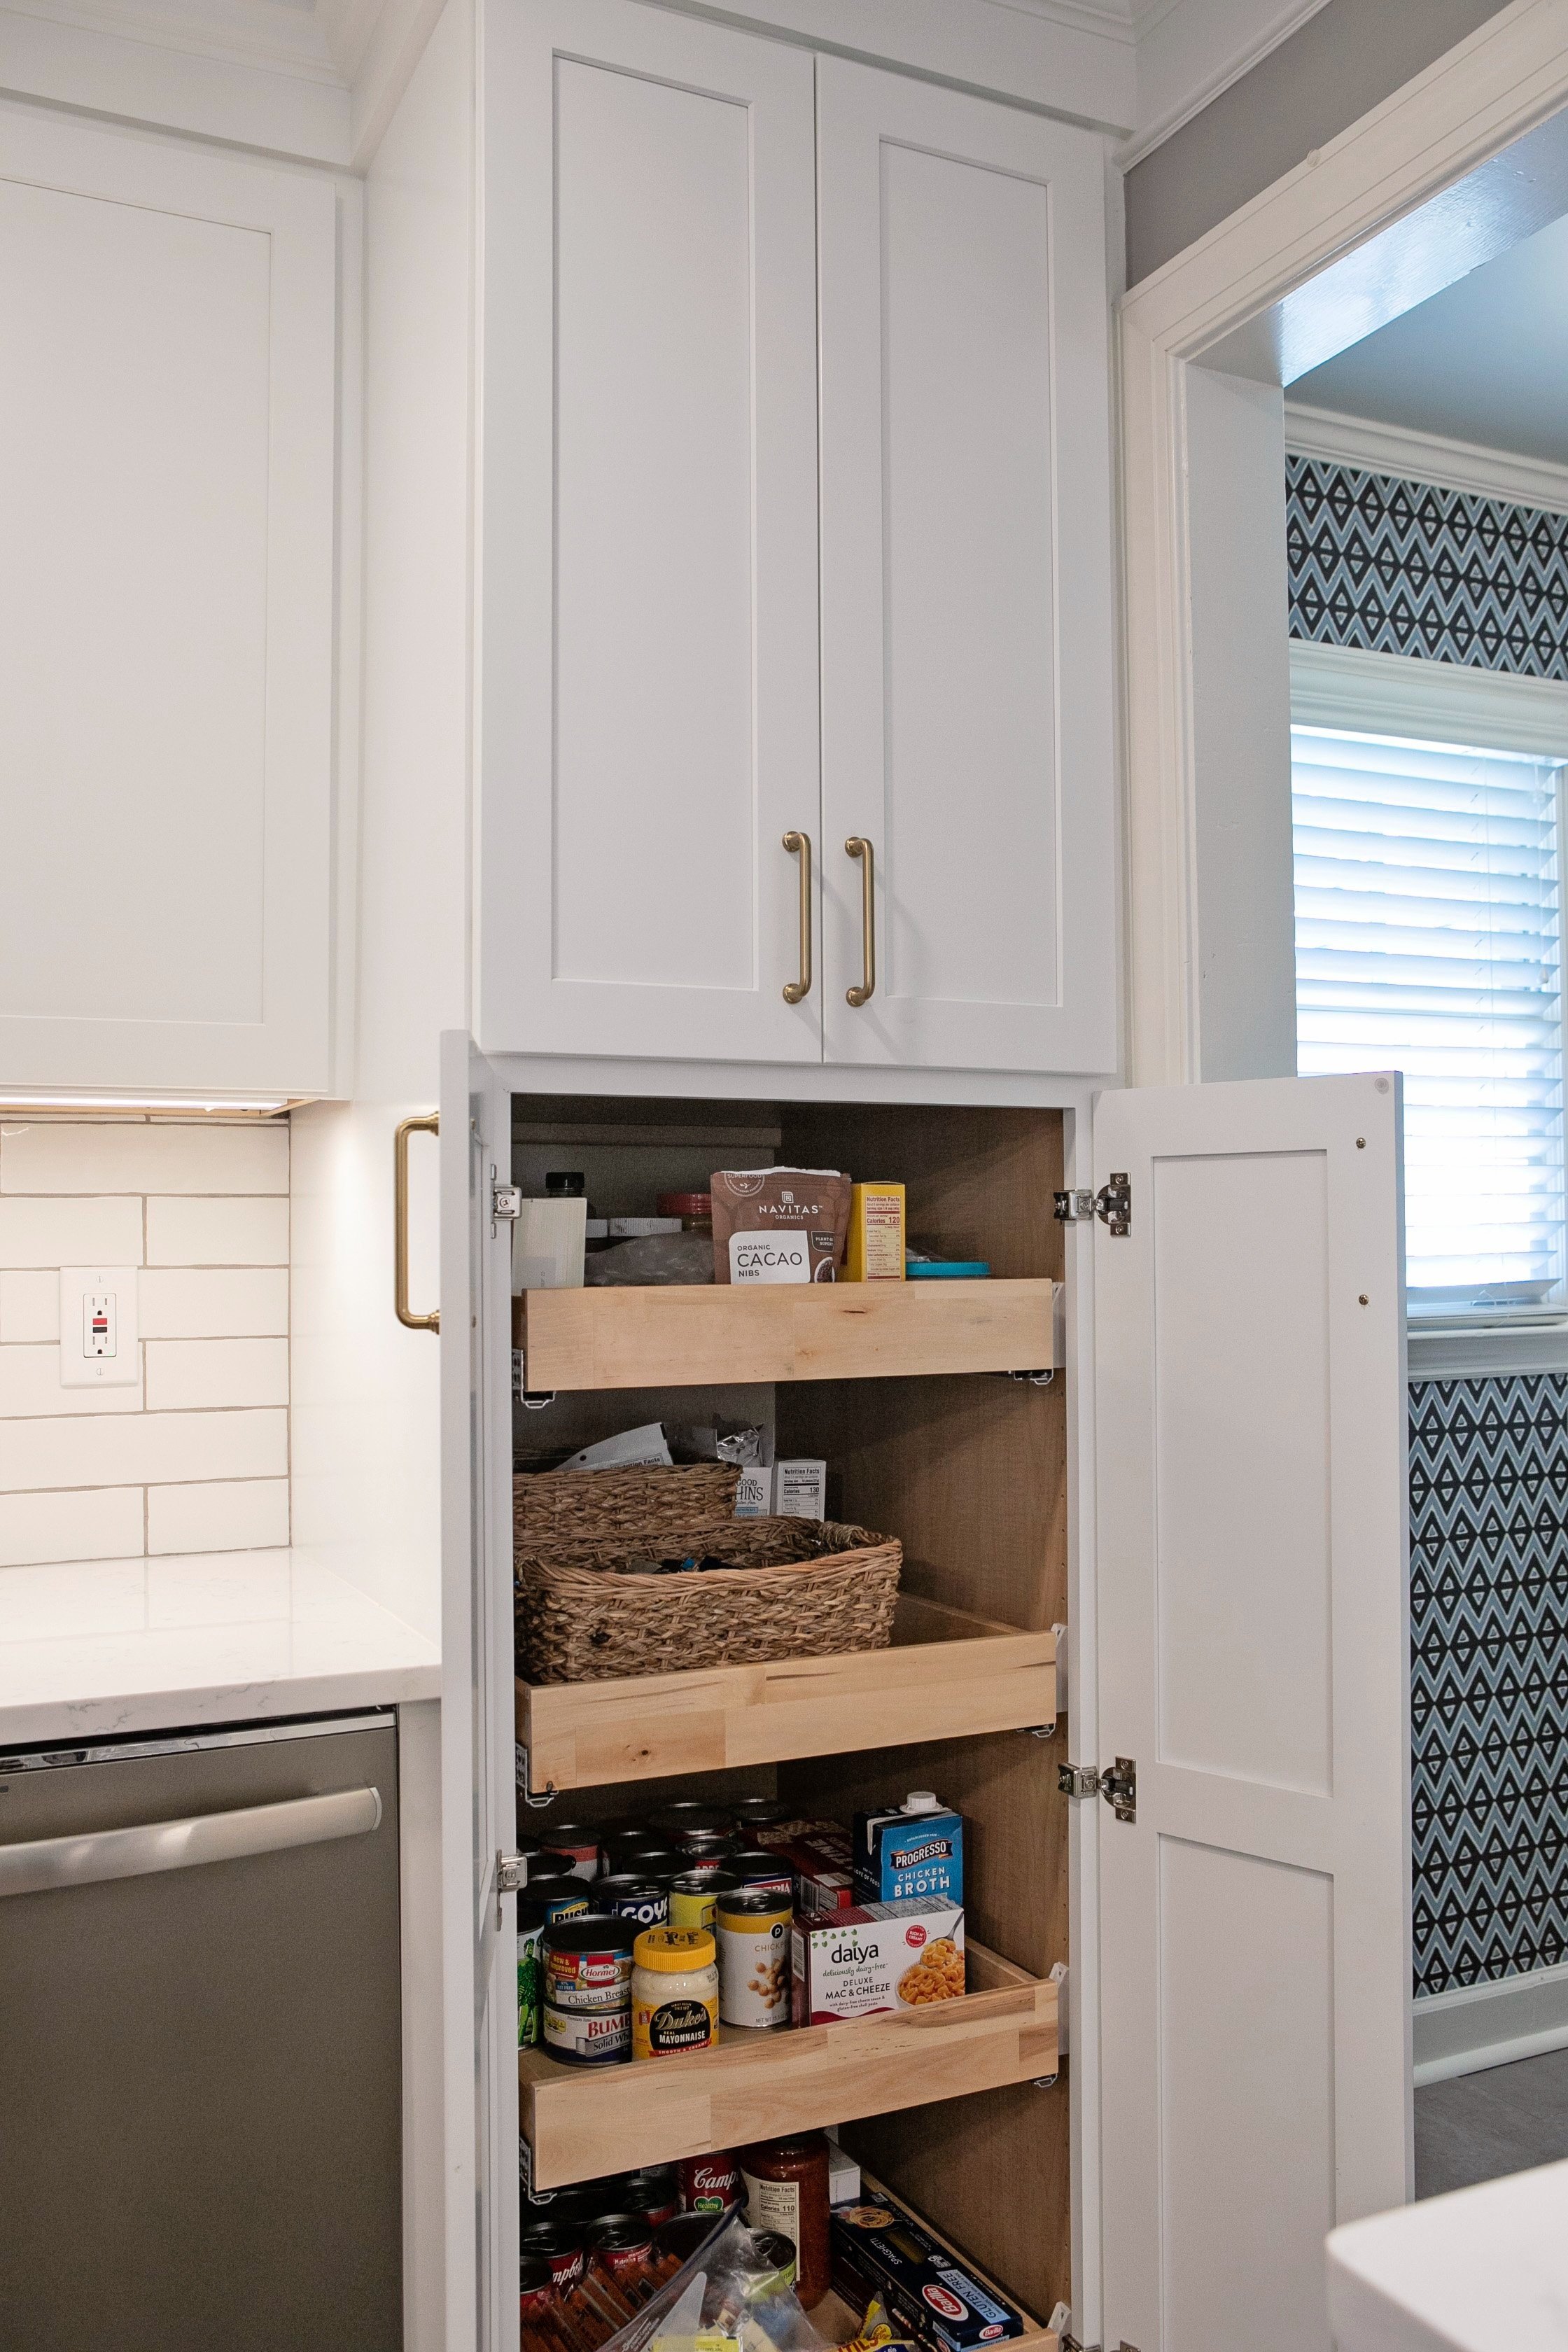 Pull-out shelves in pantry cabinet